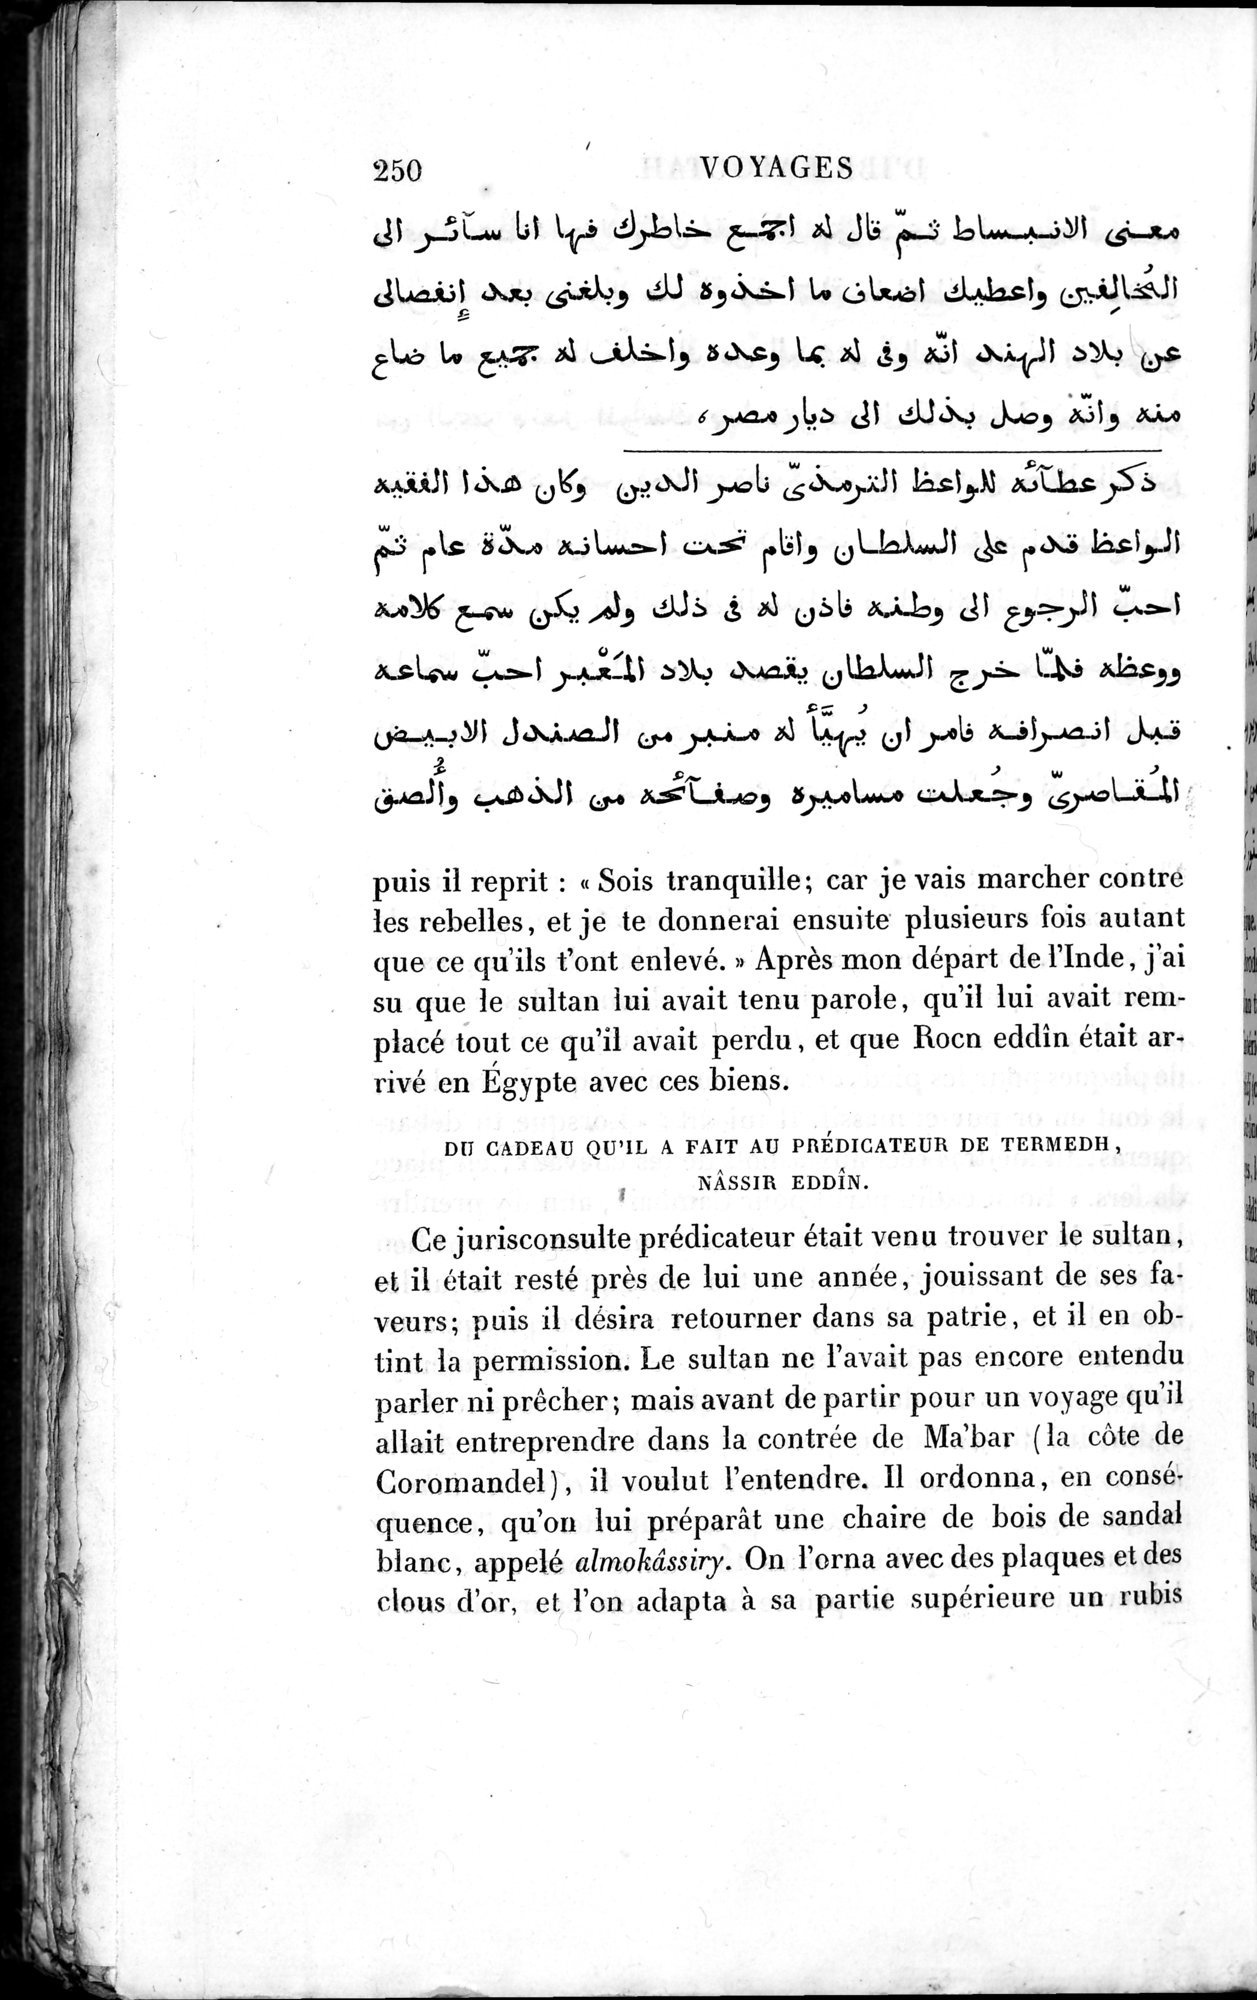 Voyages d'Ibn Batoutah : vol.3 / Page 290 (Grayscale High Resolution Image)